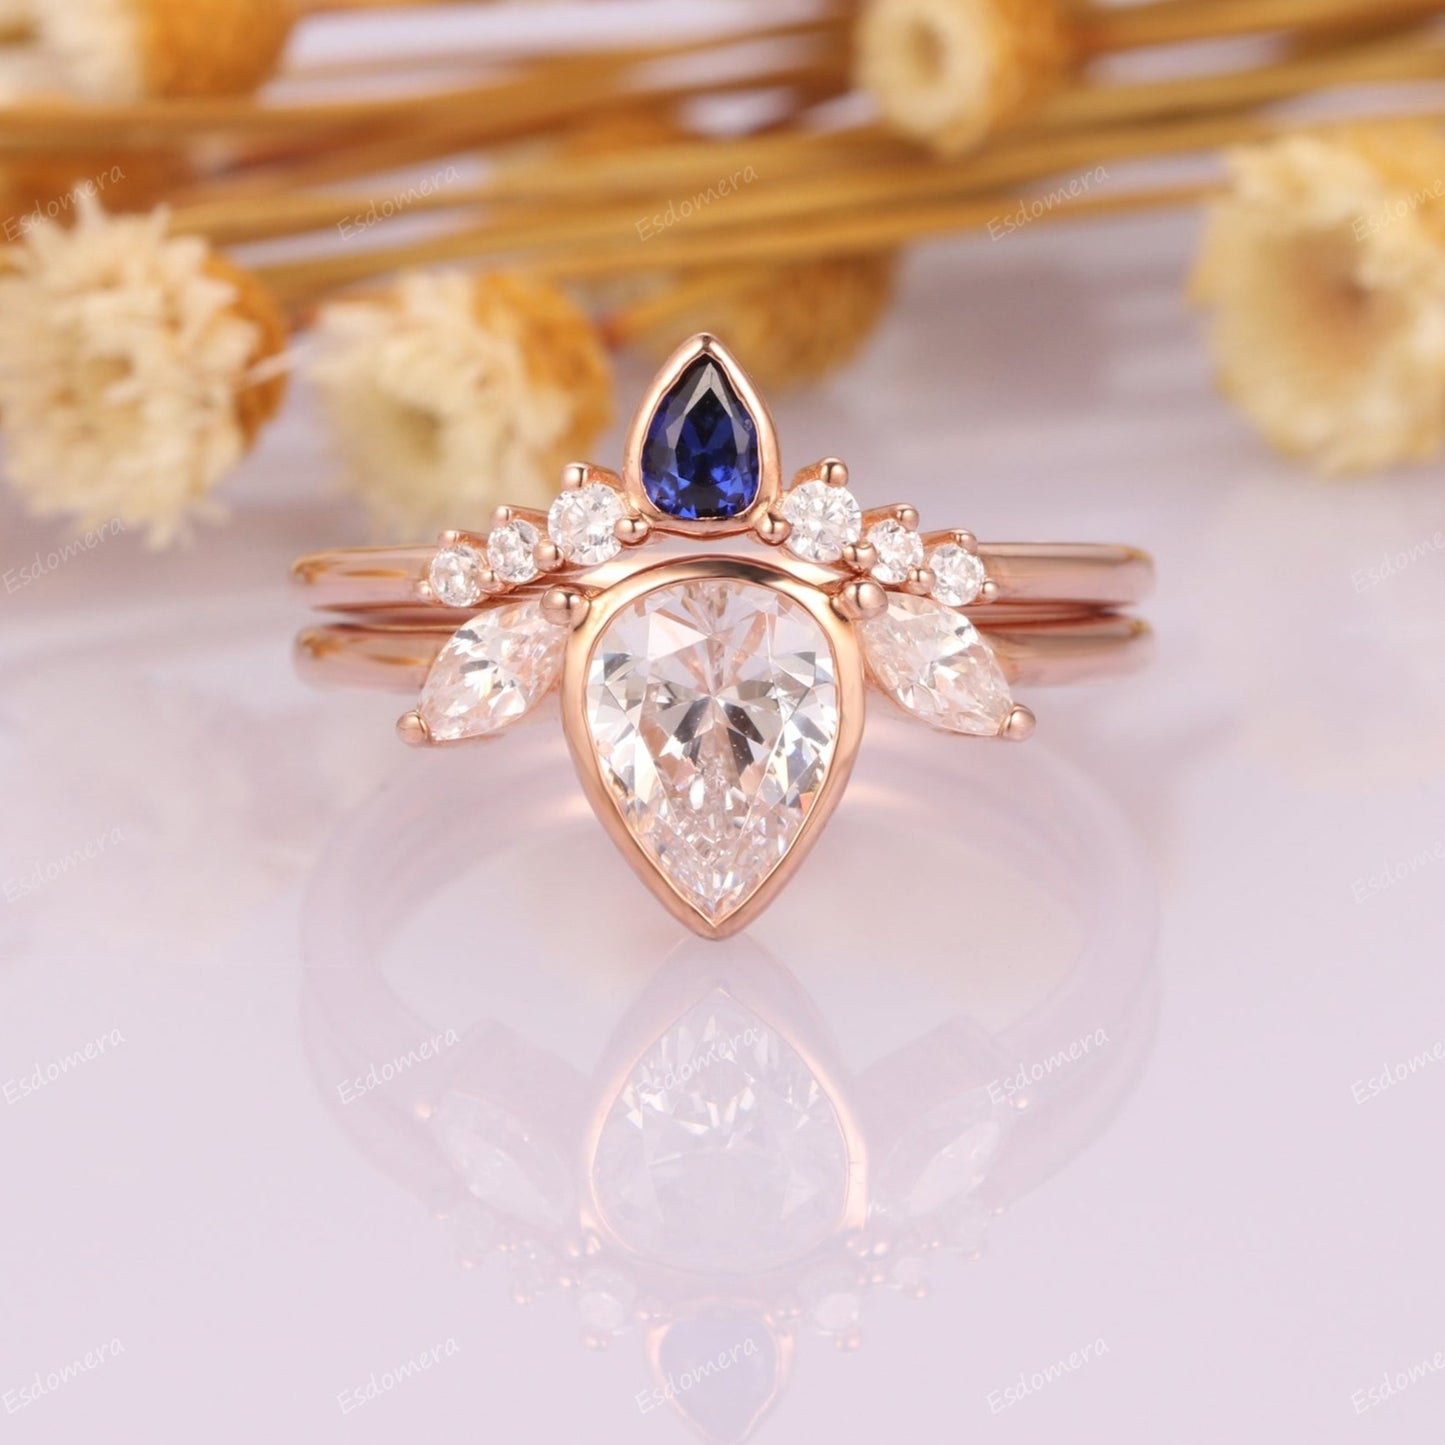 Vintage 14k Rose Gold Bridal Sets, Pear Cut 1.3CT Moissanite Promise Engagement Ring, Blue Sapphire Curved Wedding Band